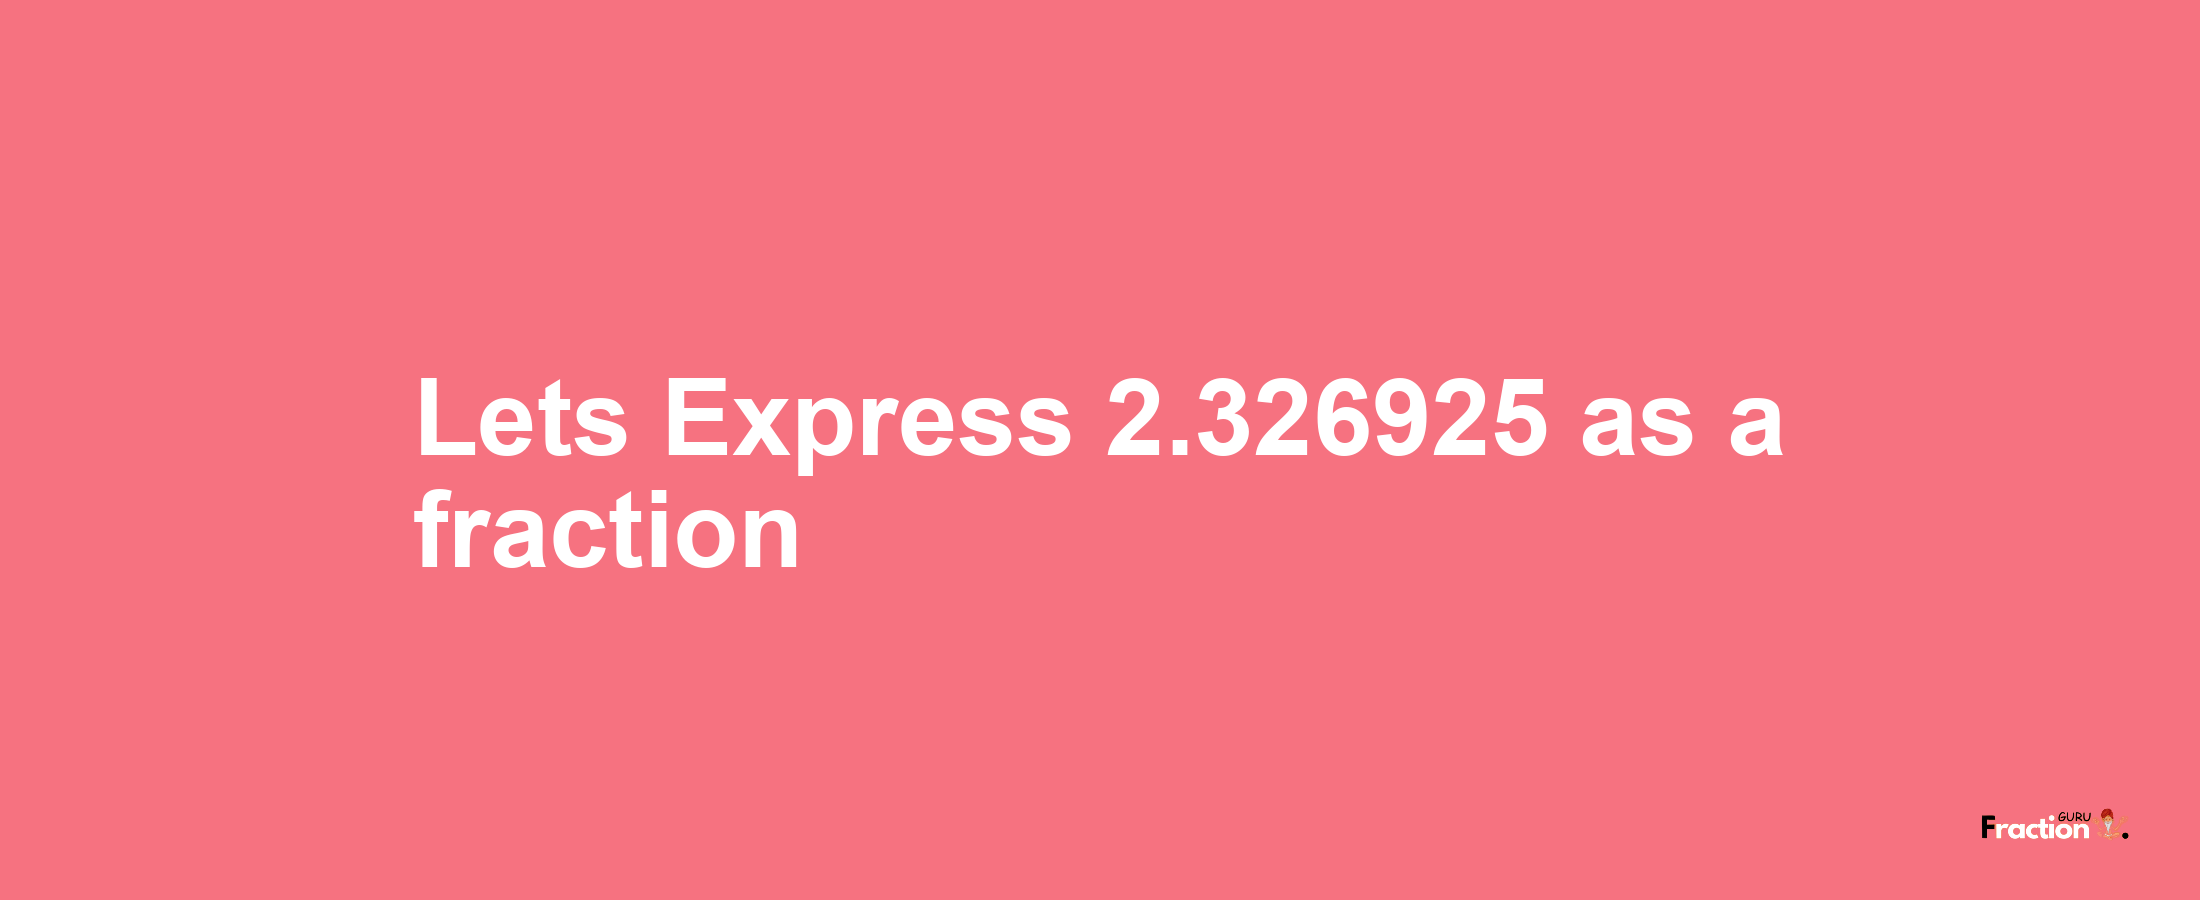 Lets Express 2.326925 as afraction